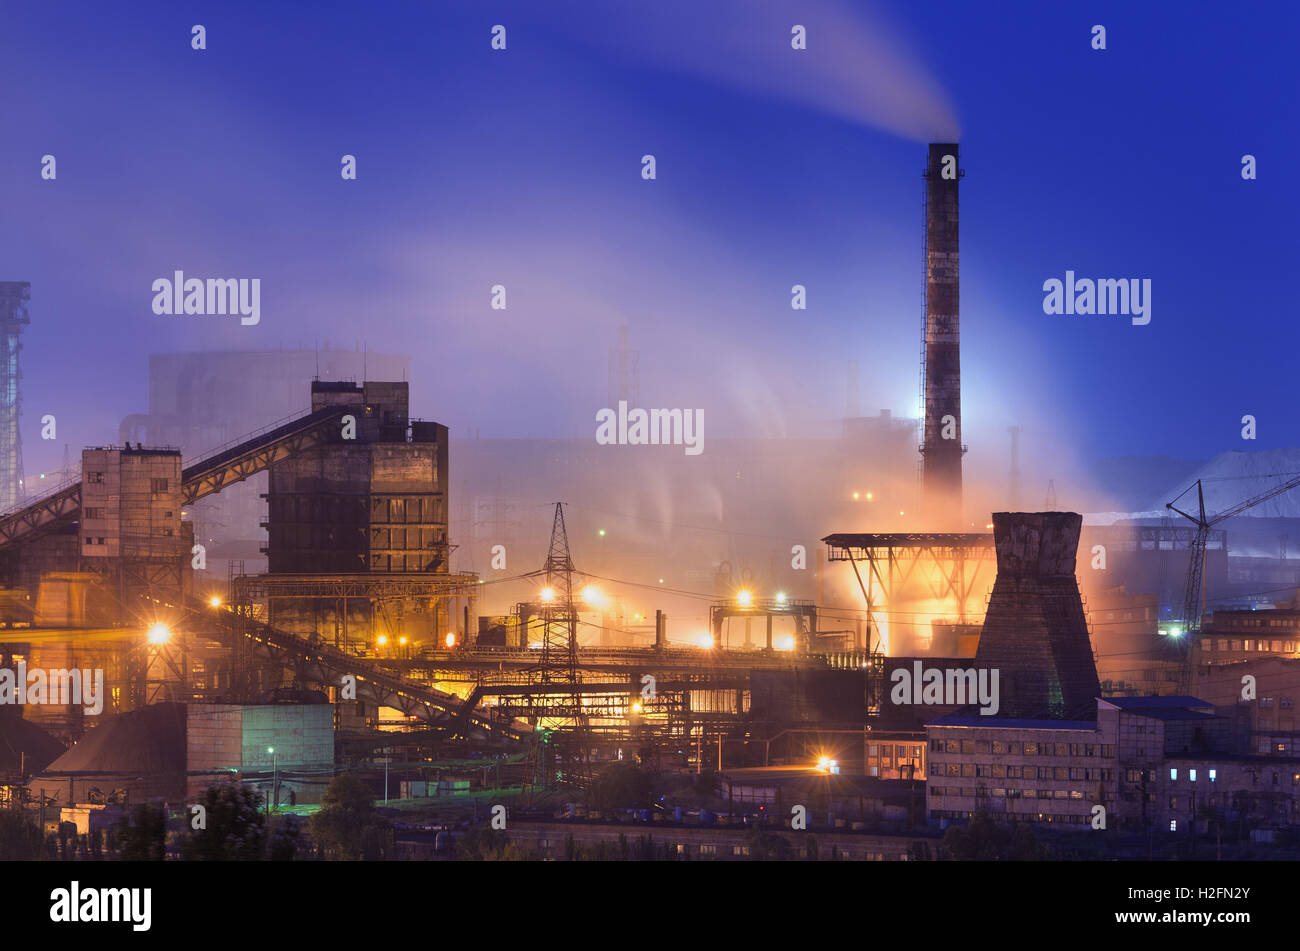 Metallurgical plant at night. Steel factory with smokestacks. Steelworks, iron works. Heavy industry in Europe. Air pollution fr Stock Photo